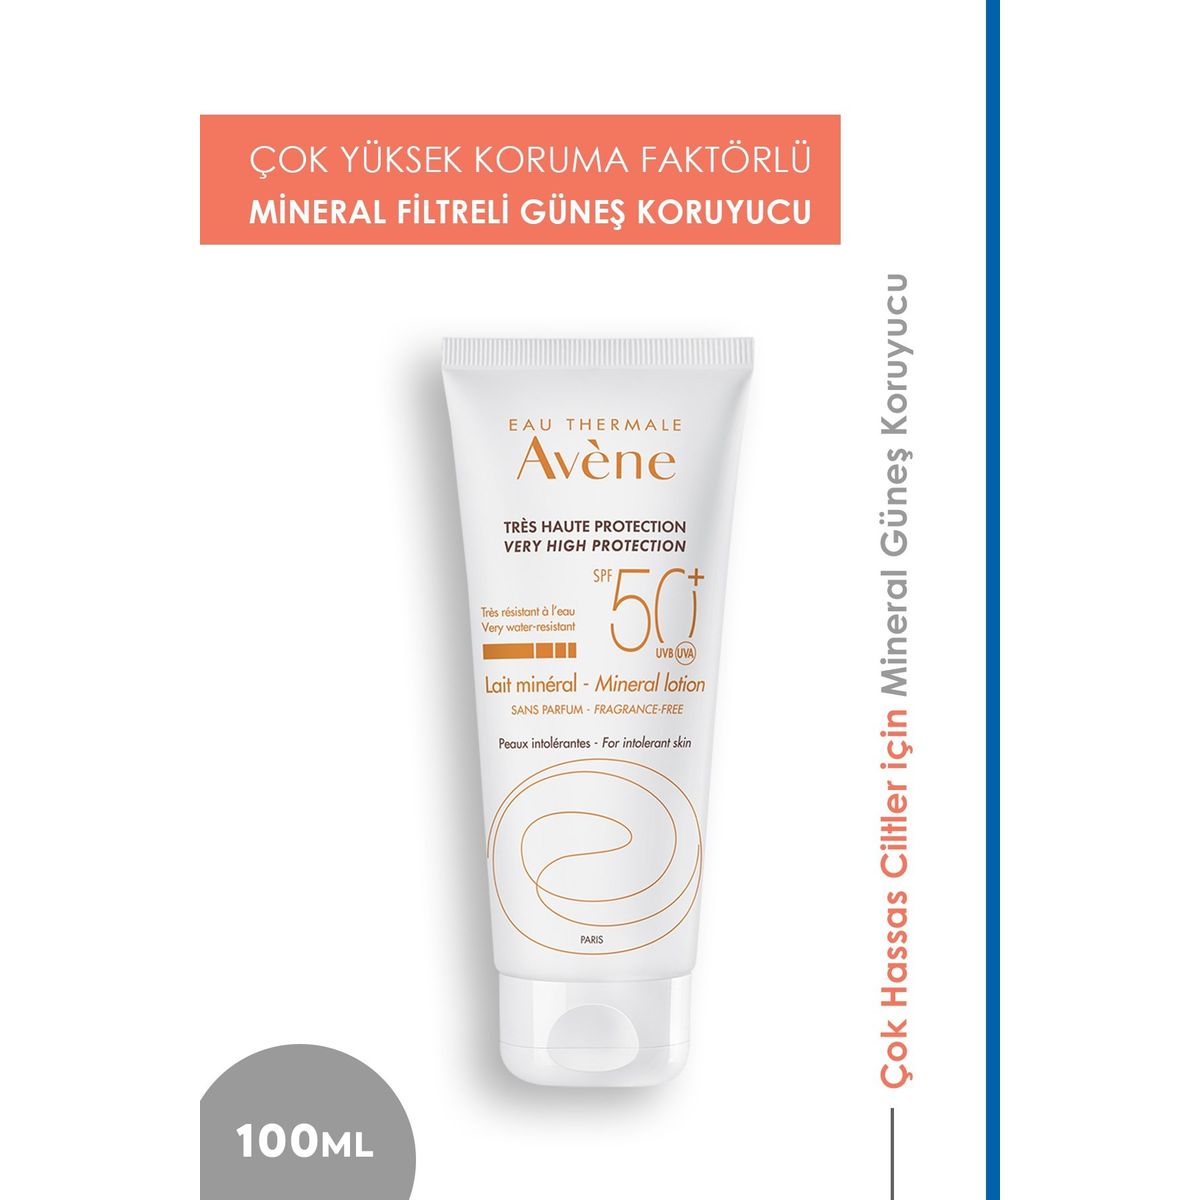 Avene lait Lotion SPF 50. Avene lait Lotion SPF 50 состав. Eau Thermale Avene Mineral Lotion.